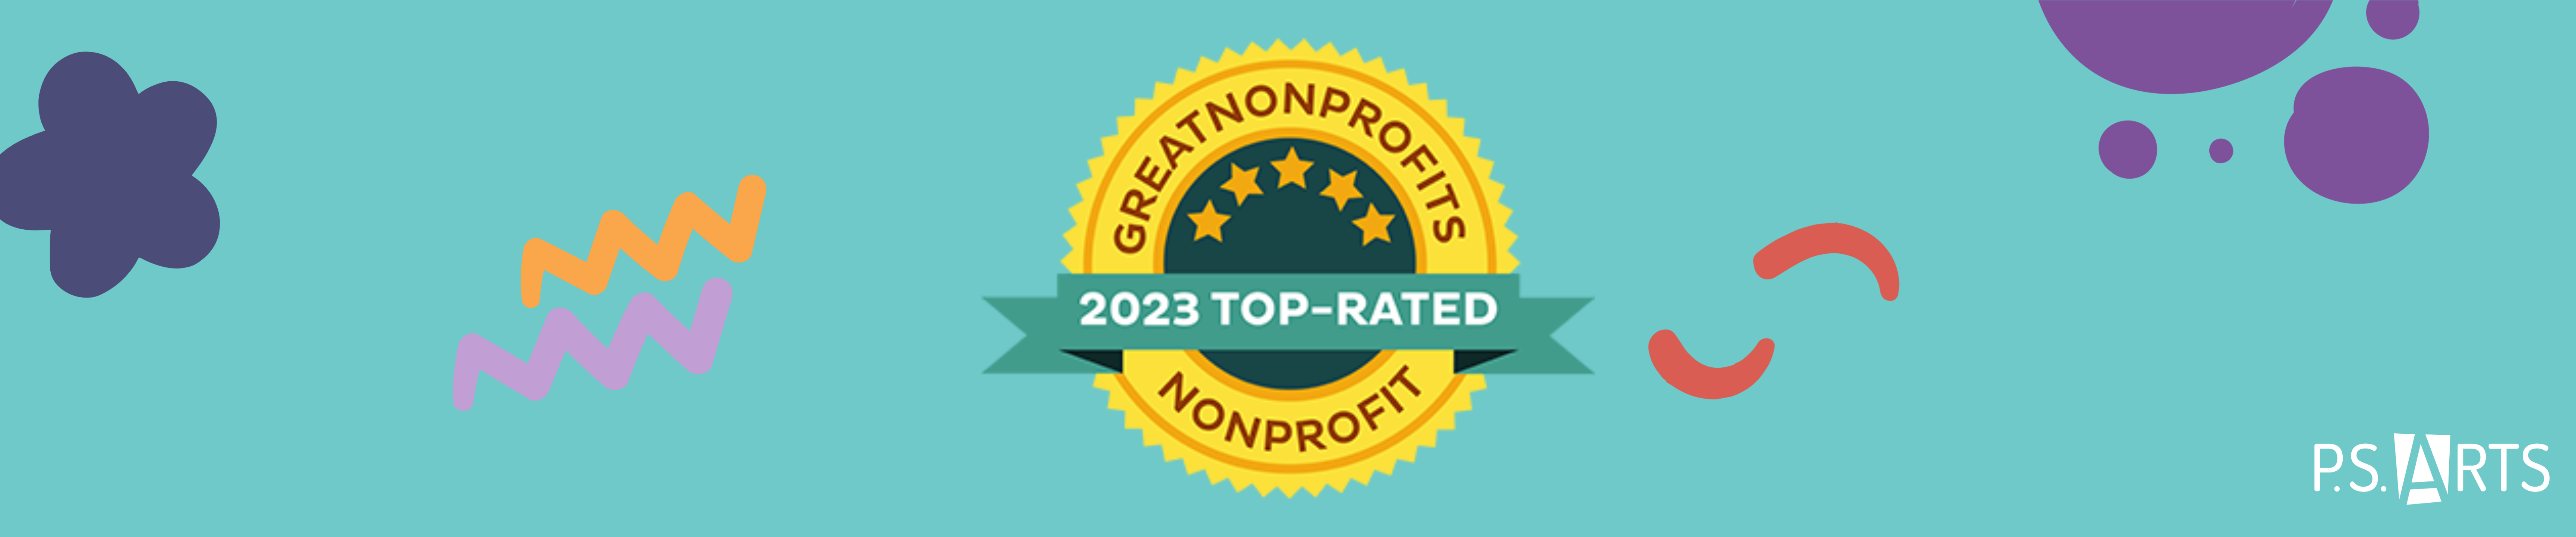 P.S. ARTS Top Rated on Great Nonprofits!